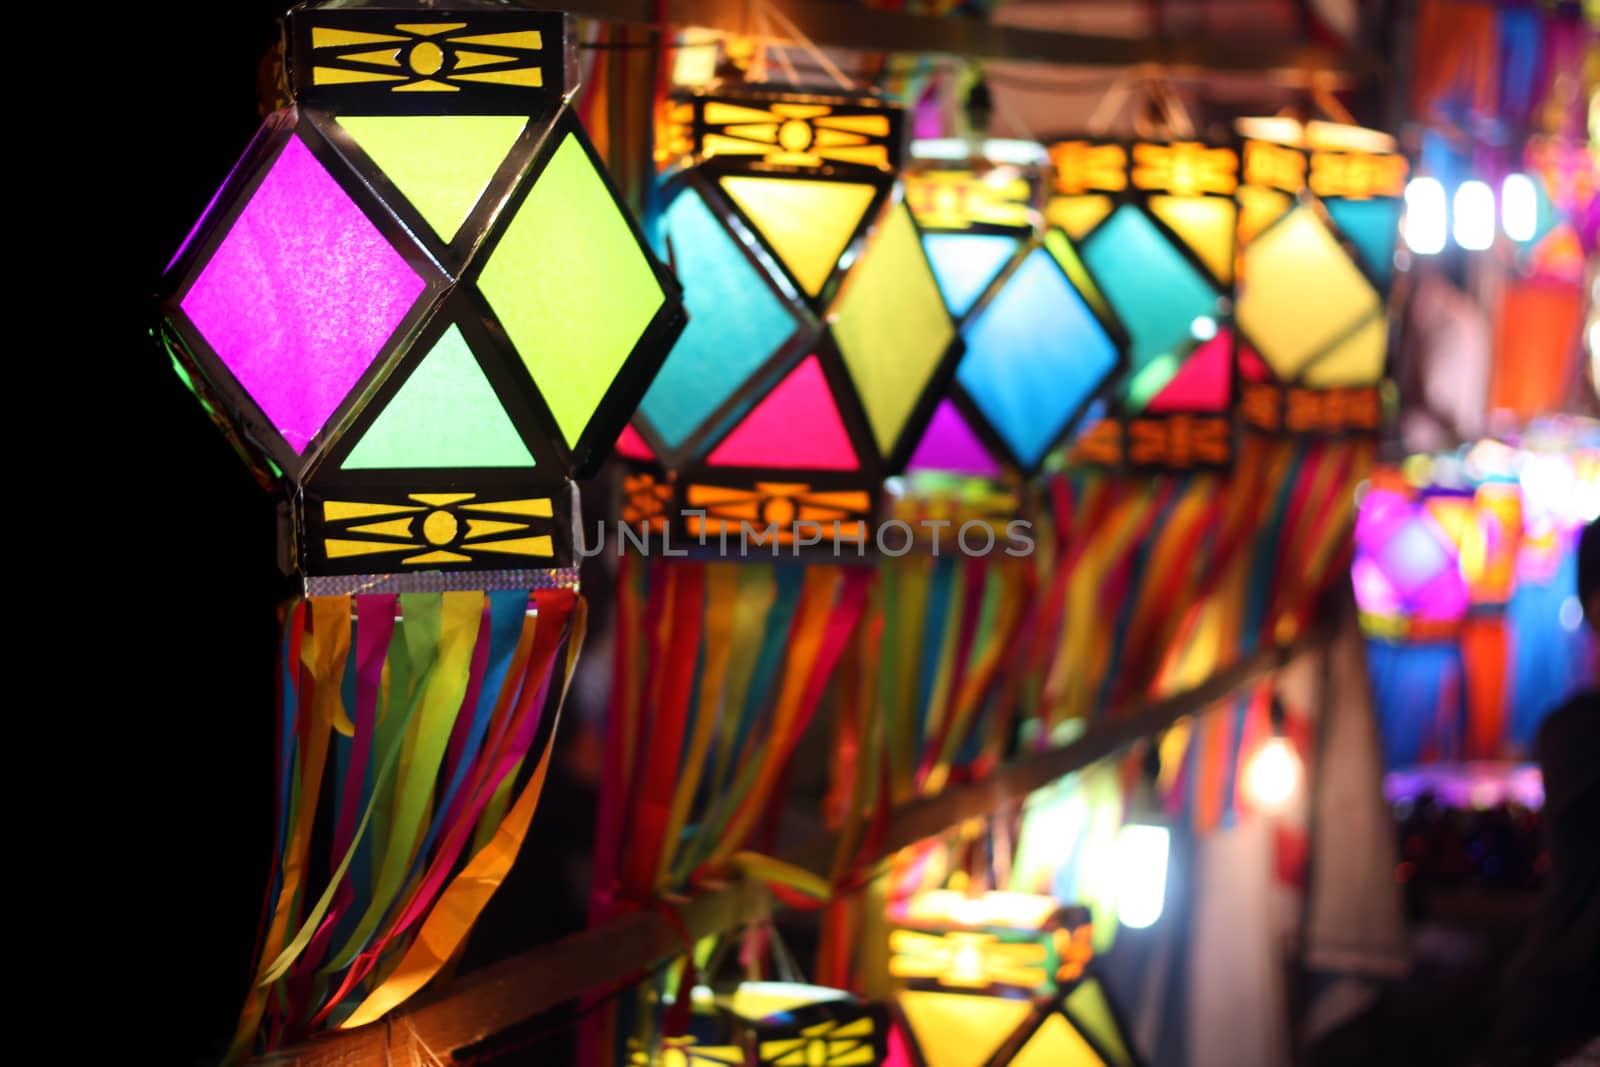 Traditionally made colorful lanterns fluttering in the winds on the Indian streetside decoration, on the occasion of Diwali festival in India